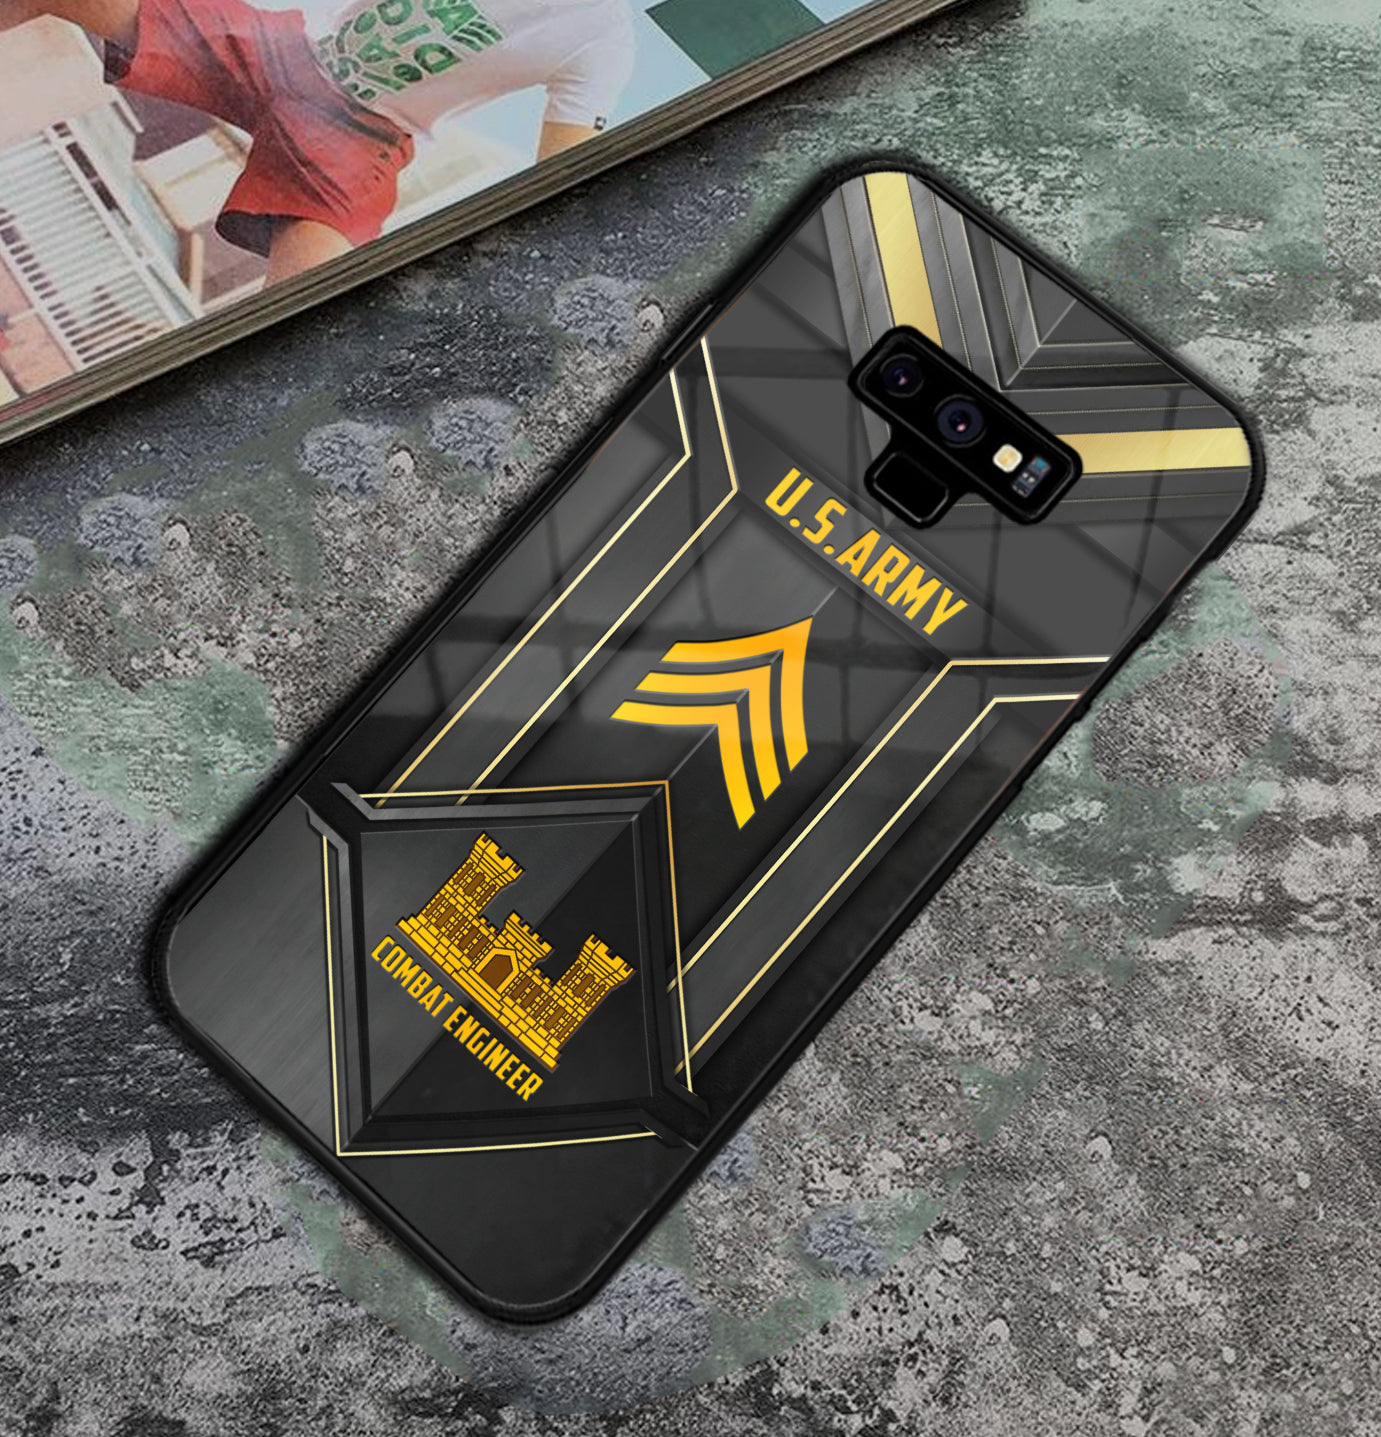 Personalized US Military - Army Branch Phone Case Printed